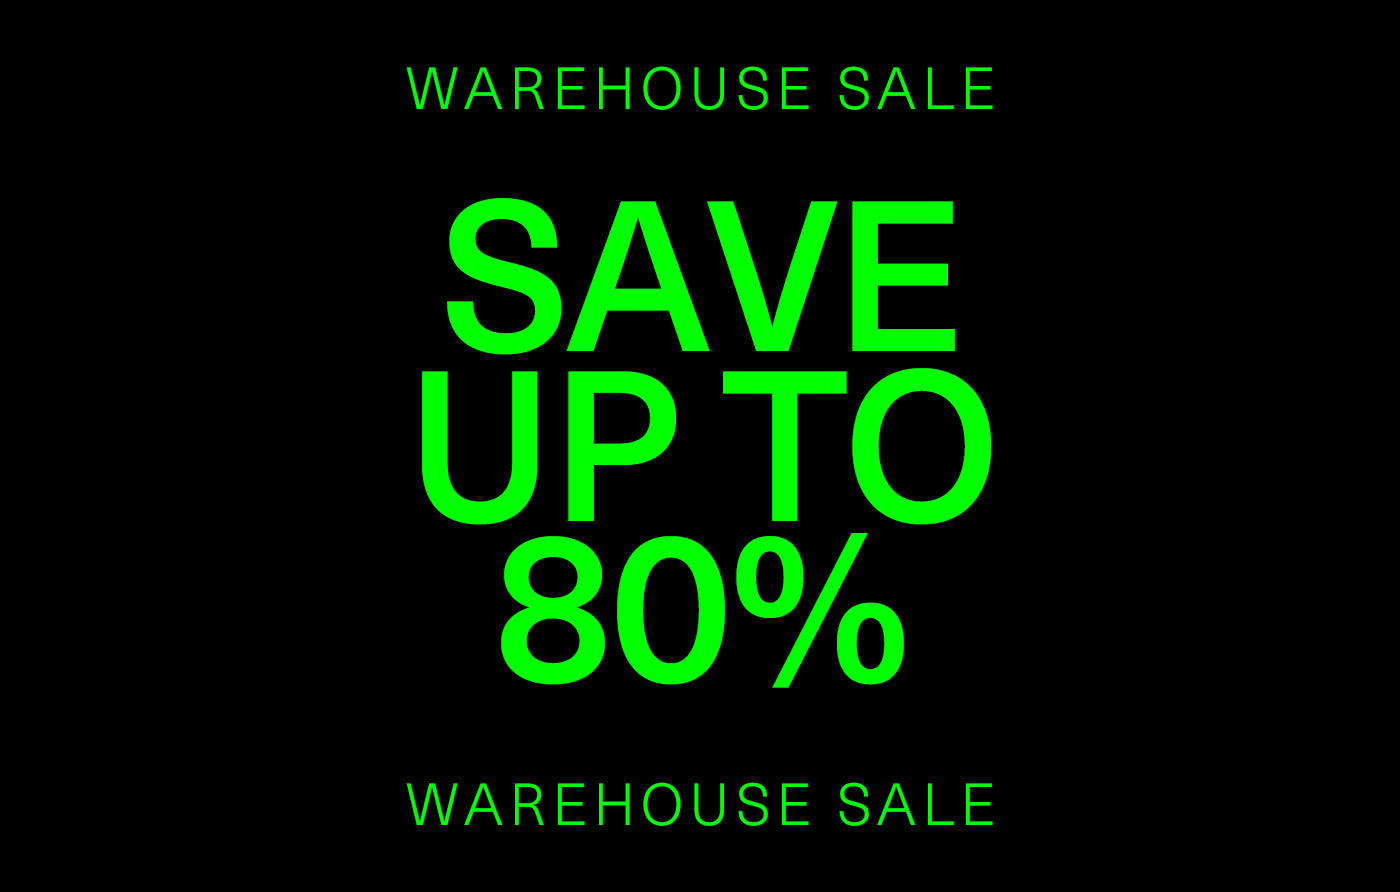 Singapore Warehouse Sale - Save the date
